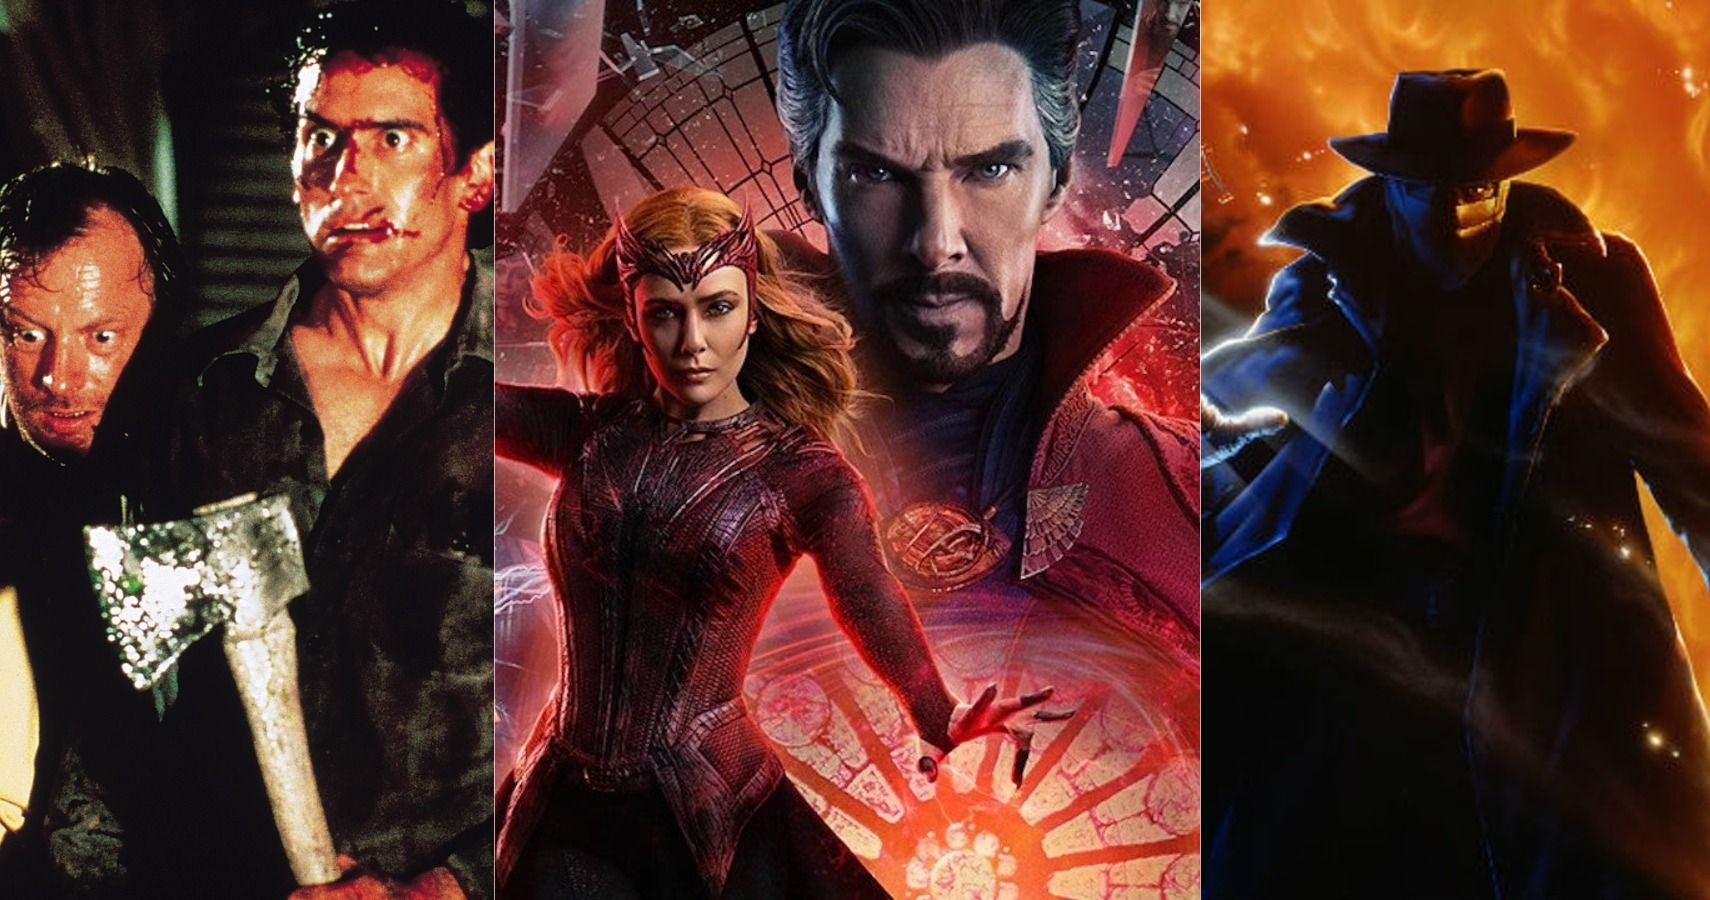 MCU/Sam Raimi: A combined feature image featuring three films directed by Sam Raimi: Evil Dead II, Doctor Strange in the Multiverse of Madness, and Darkman.